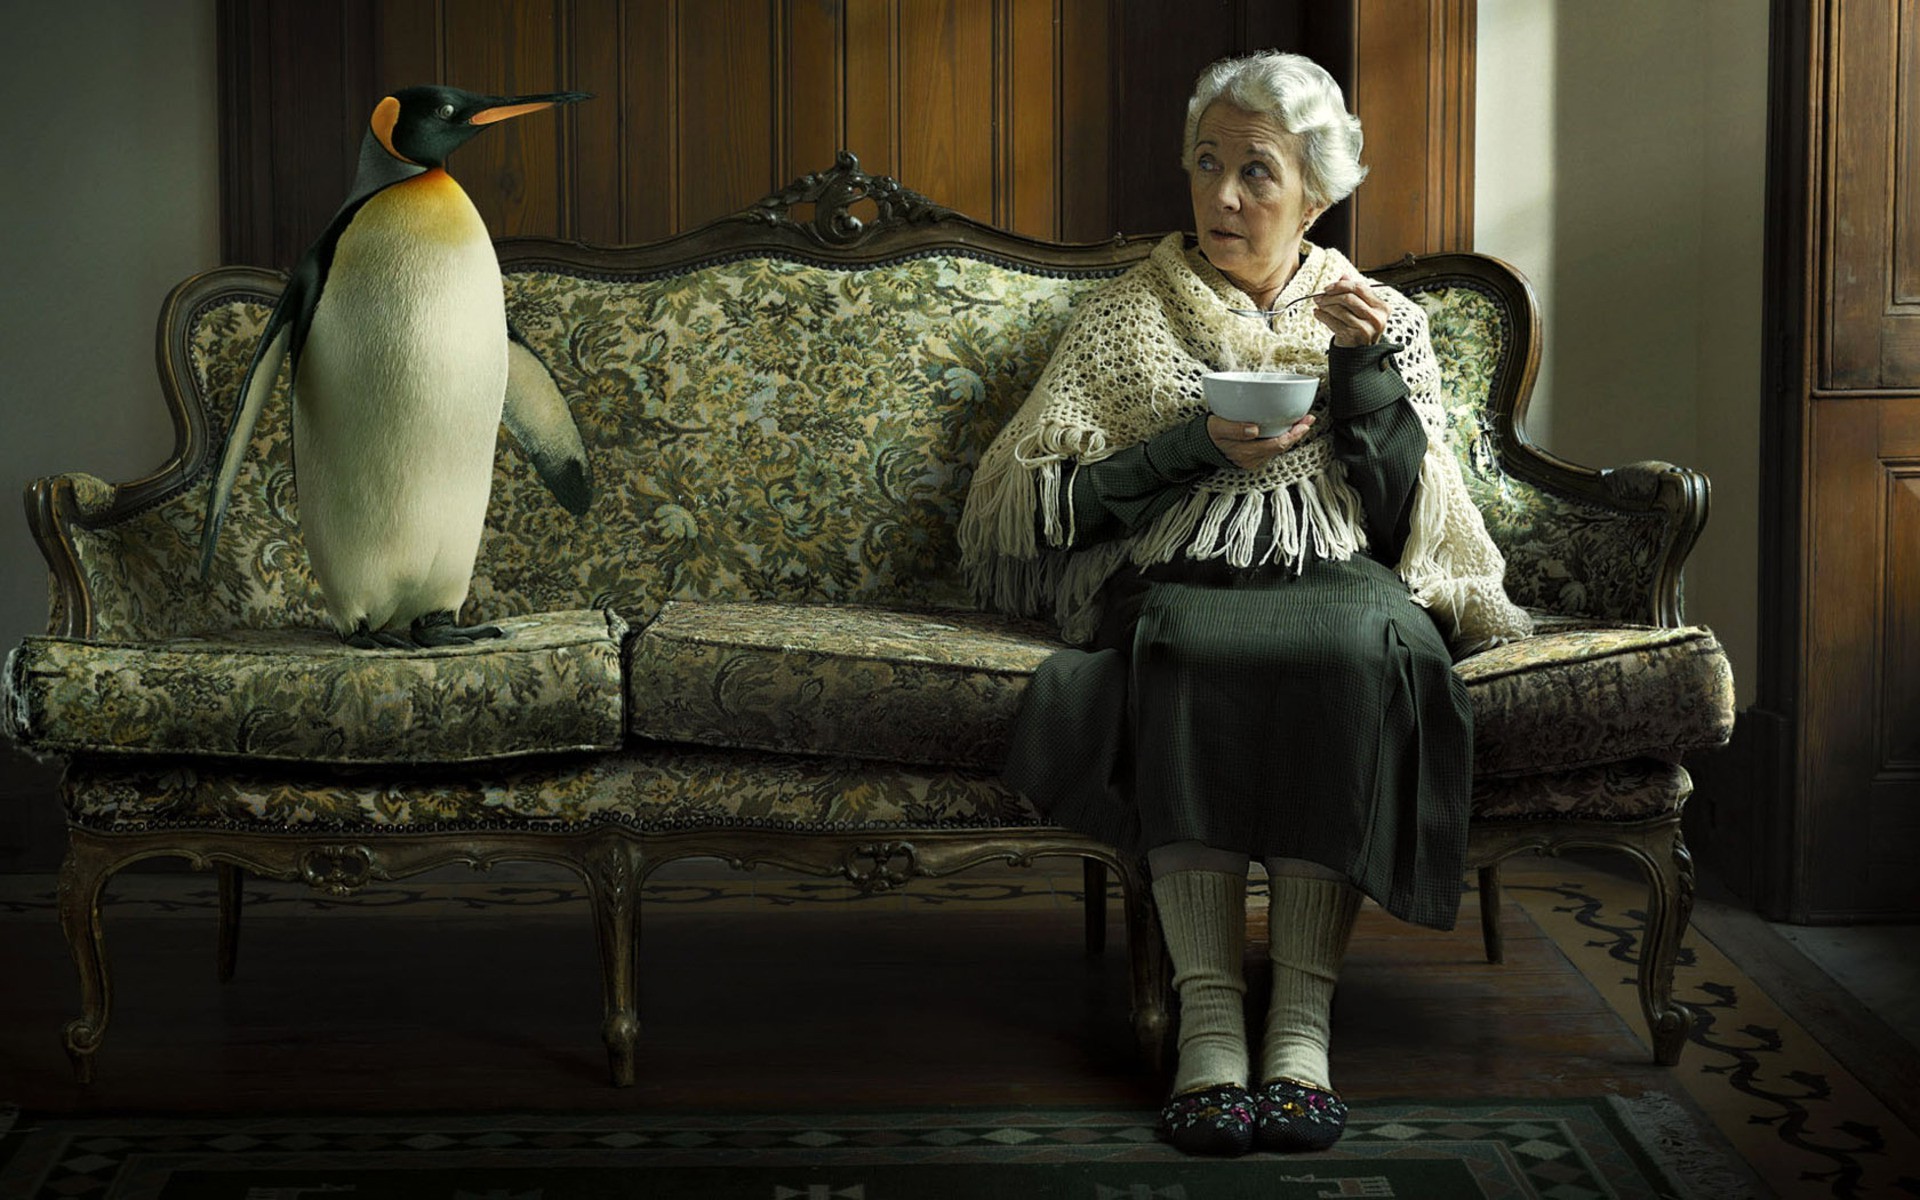 penguins couch carpets sitting birds soup old people Wallpaper